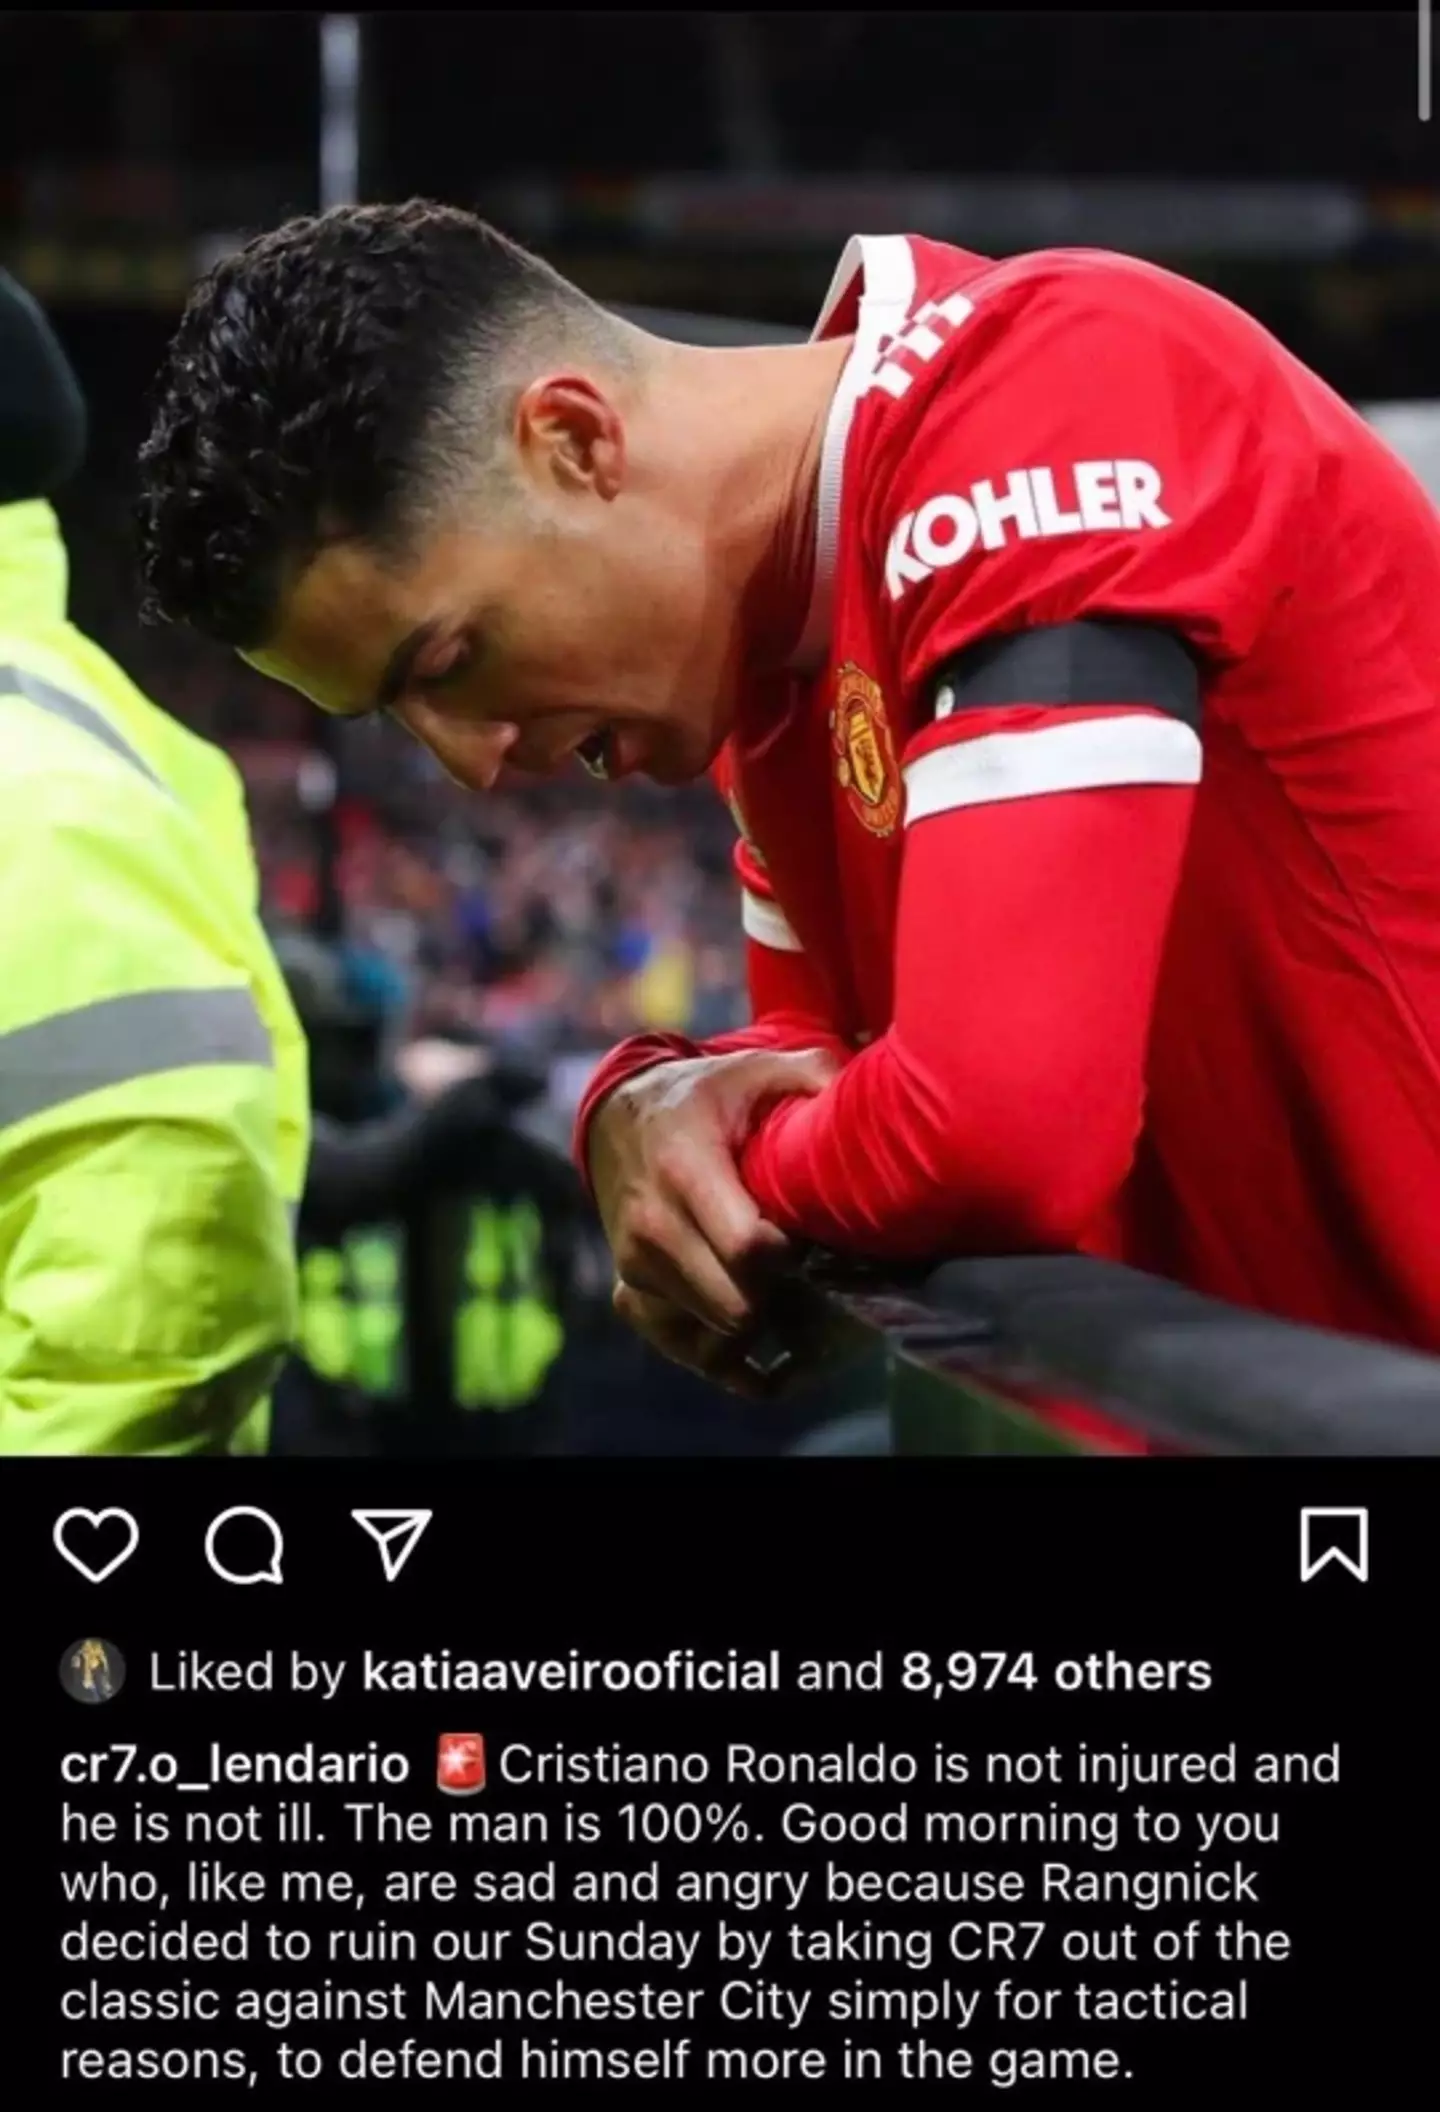 Ronaldo's sister liked this post on Instagram which claimed he is not injured (Image: Instagram)